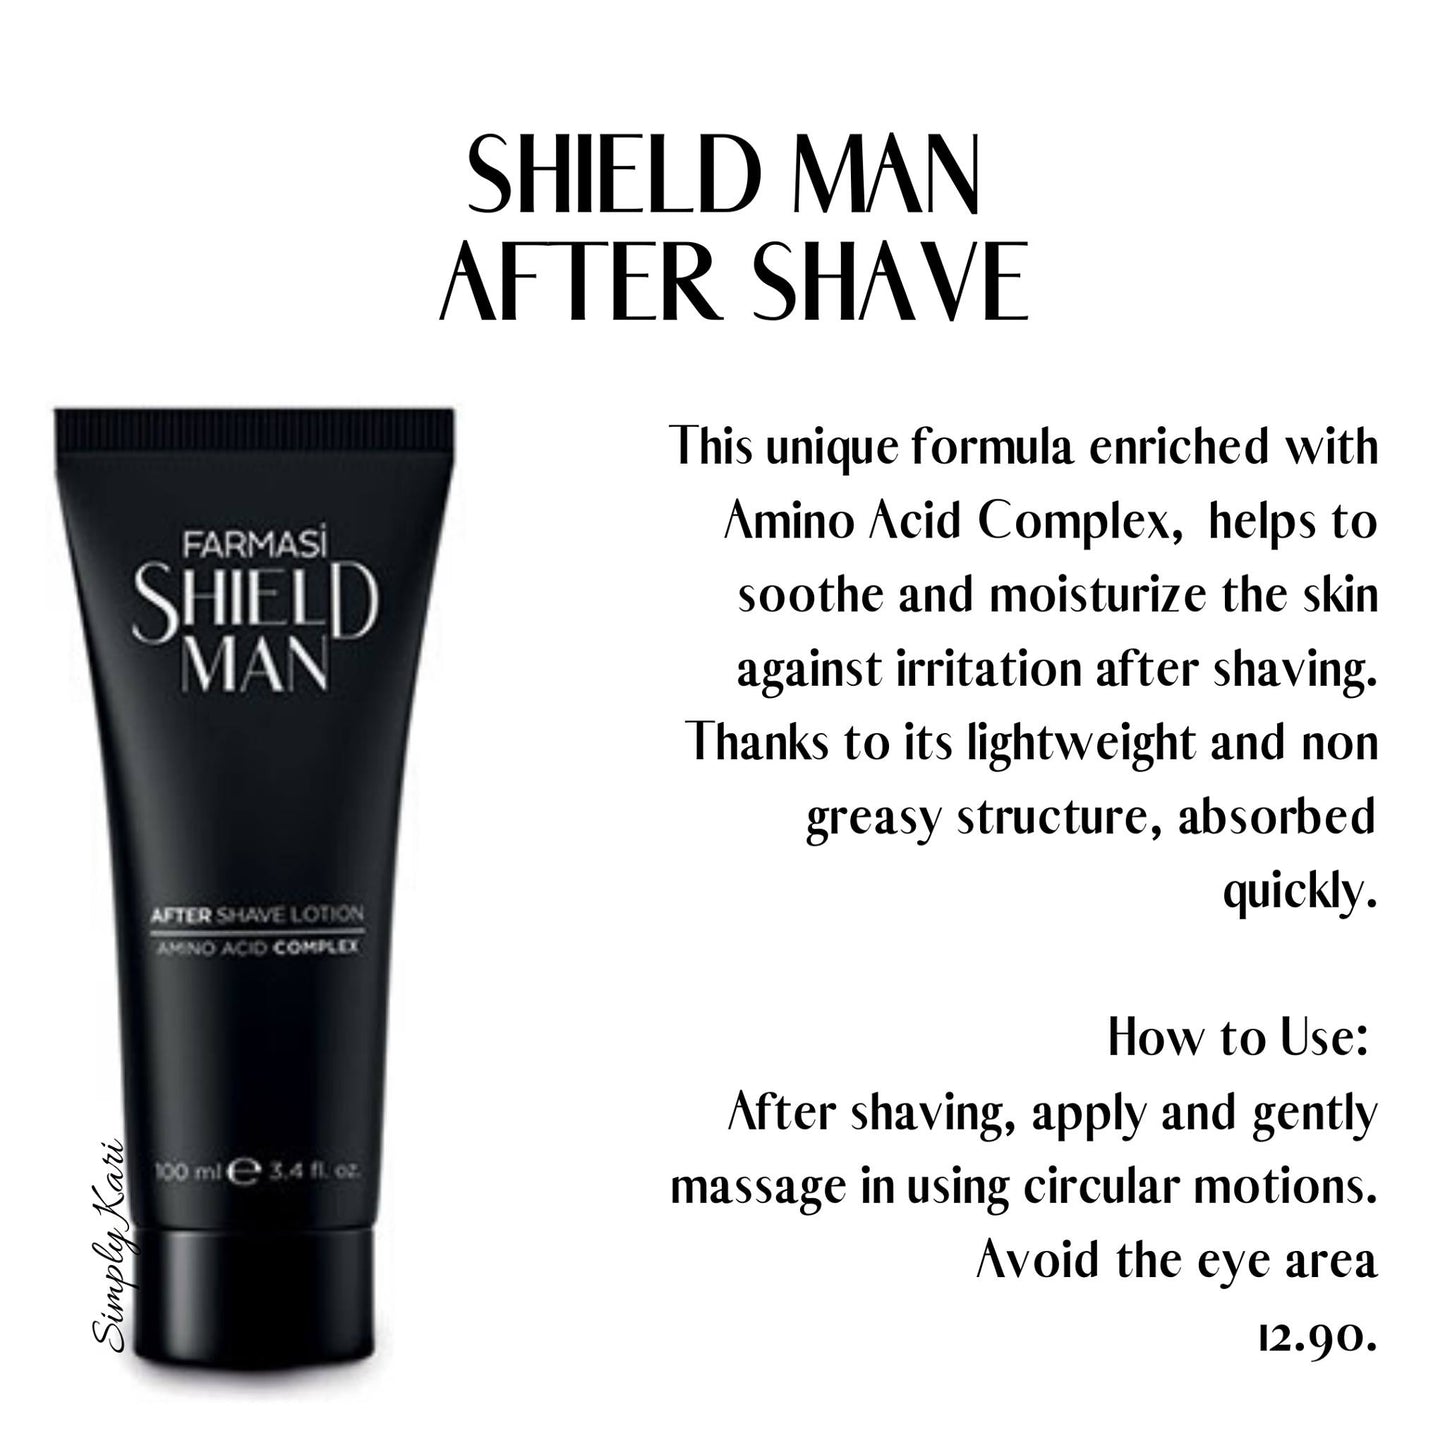 After Shave Lotion - Shield Man | Farmasi